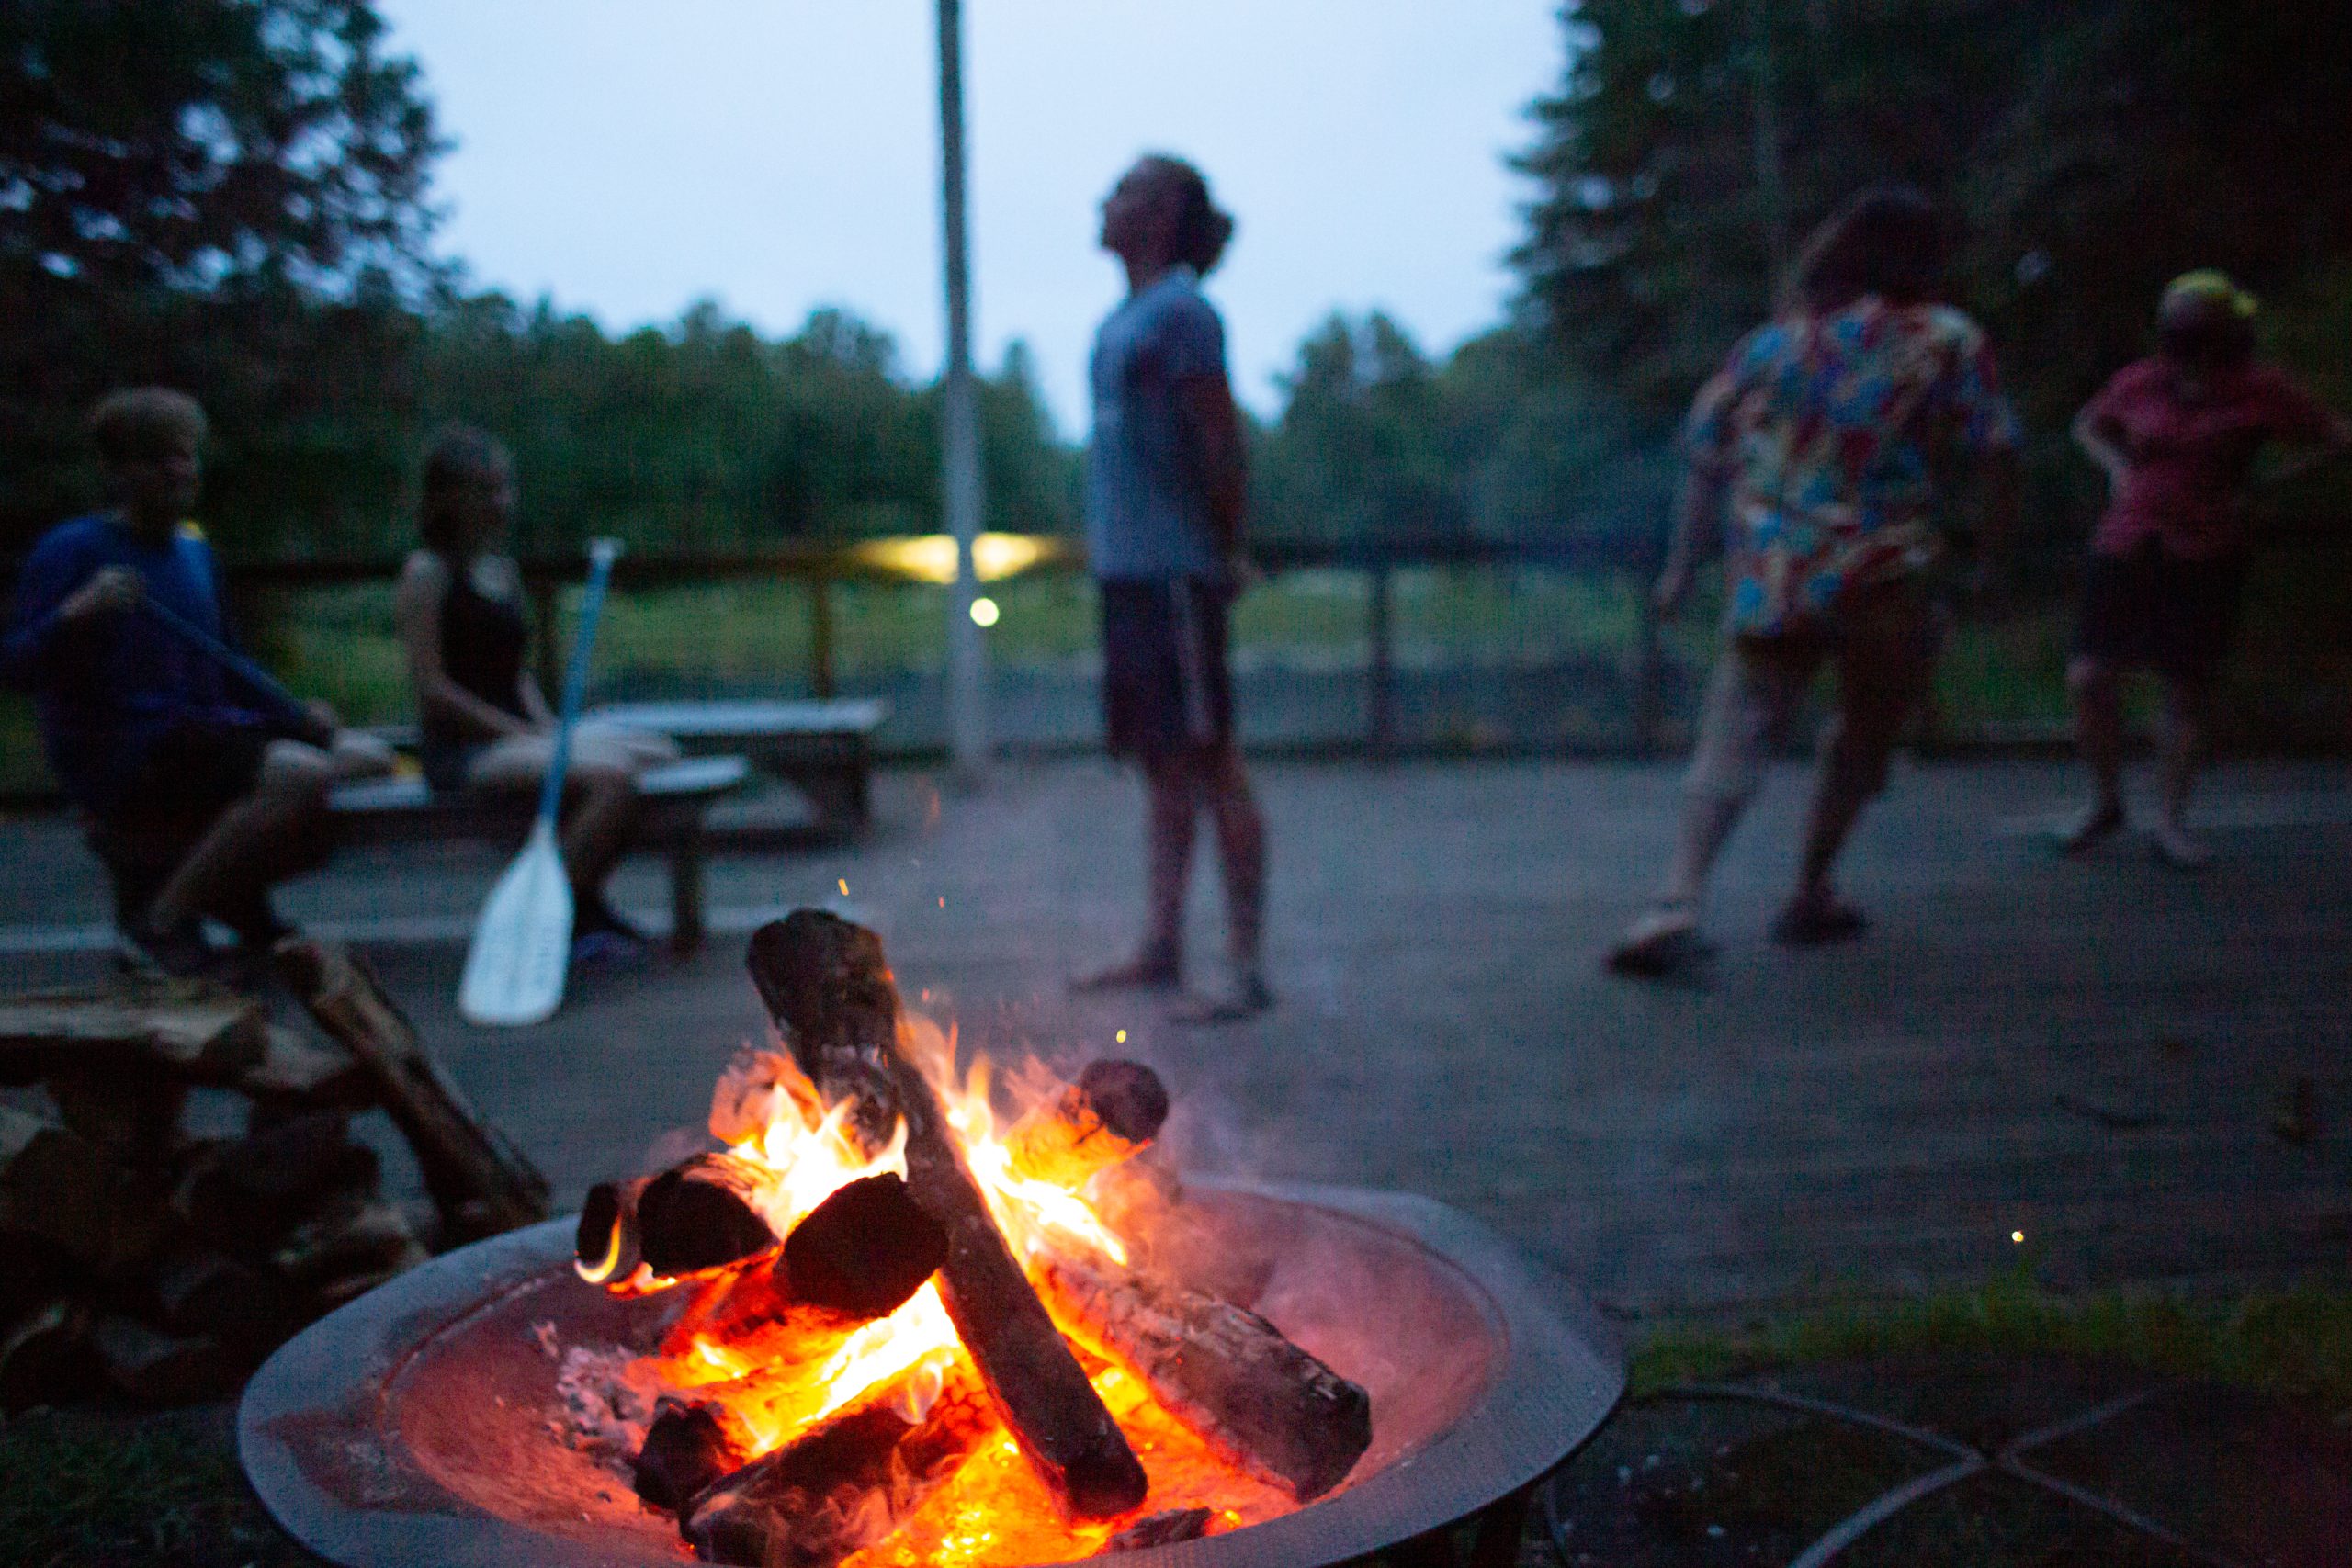 Some people gathered by a fire pit at dusk